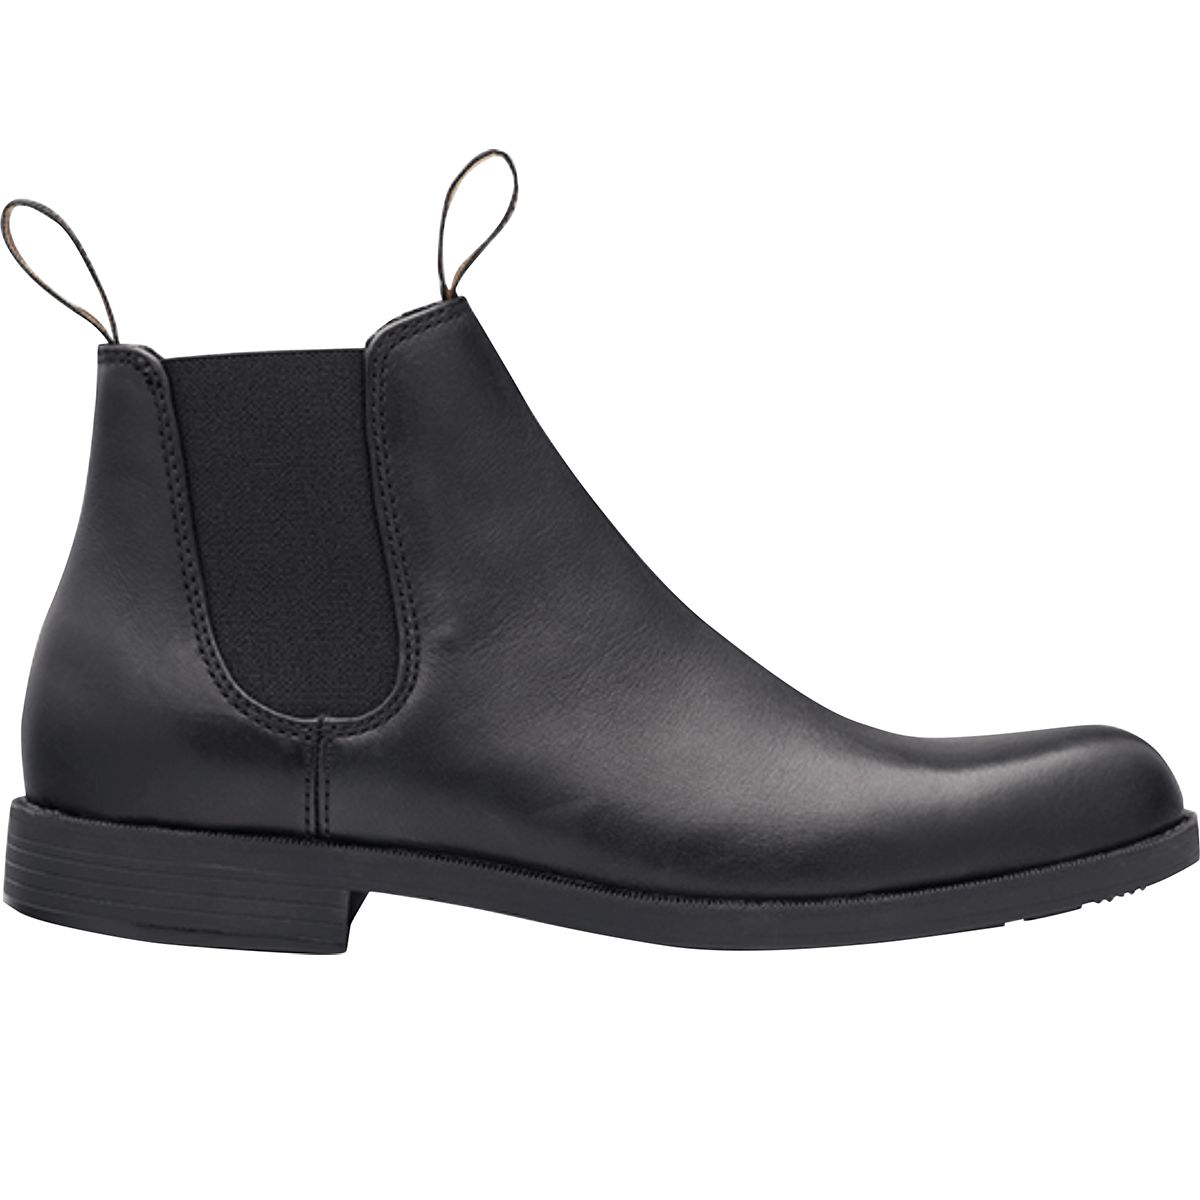 Blundstone Ankle Boot - Men's